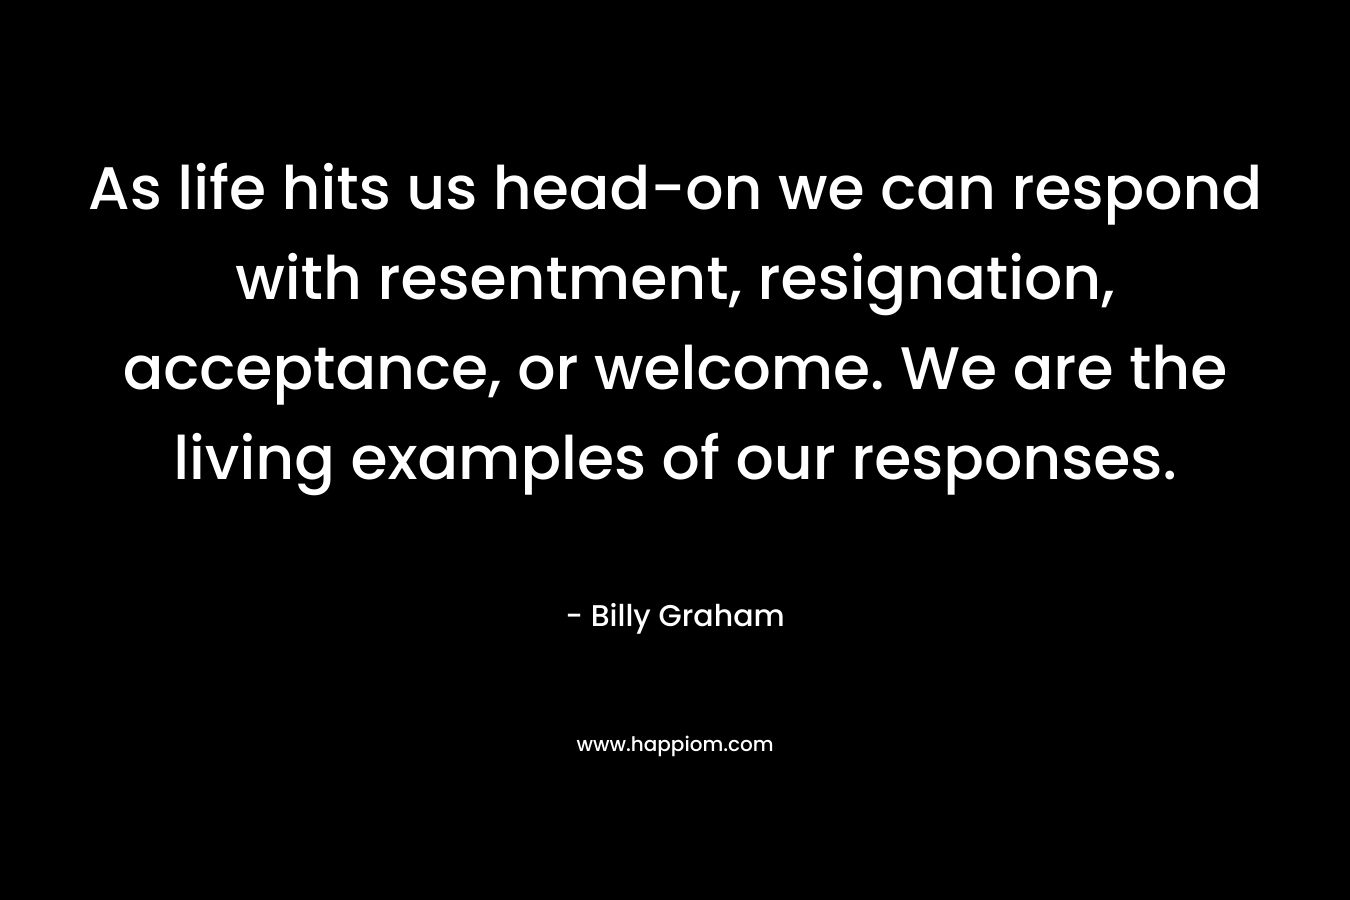 As life hits us head-on we can respond with resentment, resignation, acceptance, or welcome. We are the living examples of our responses.